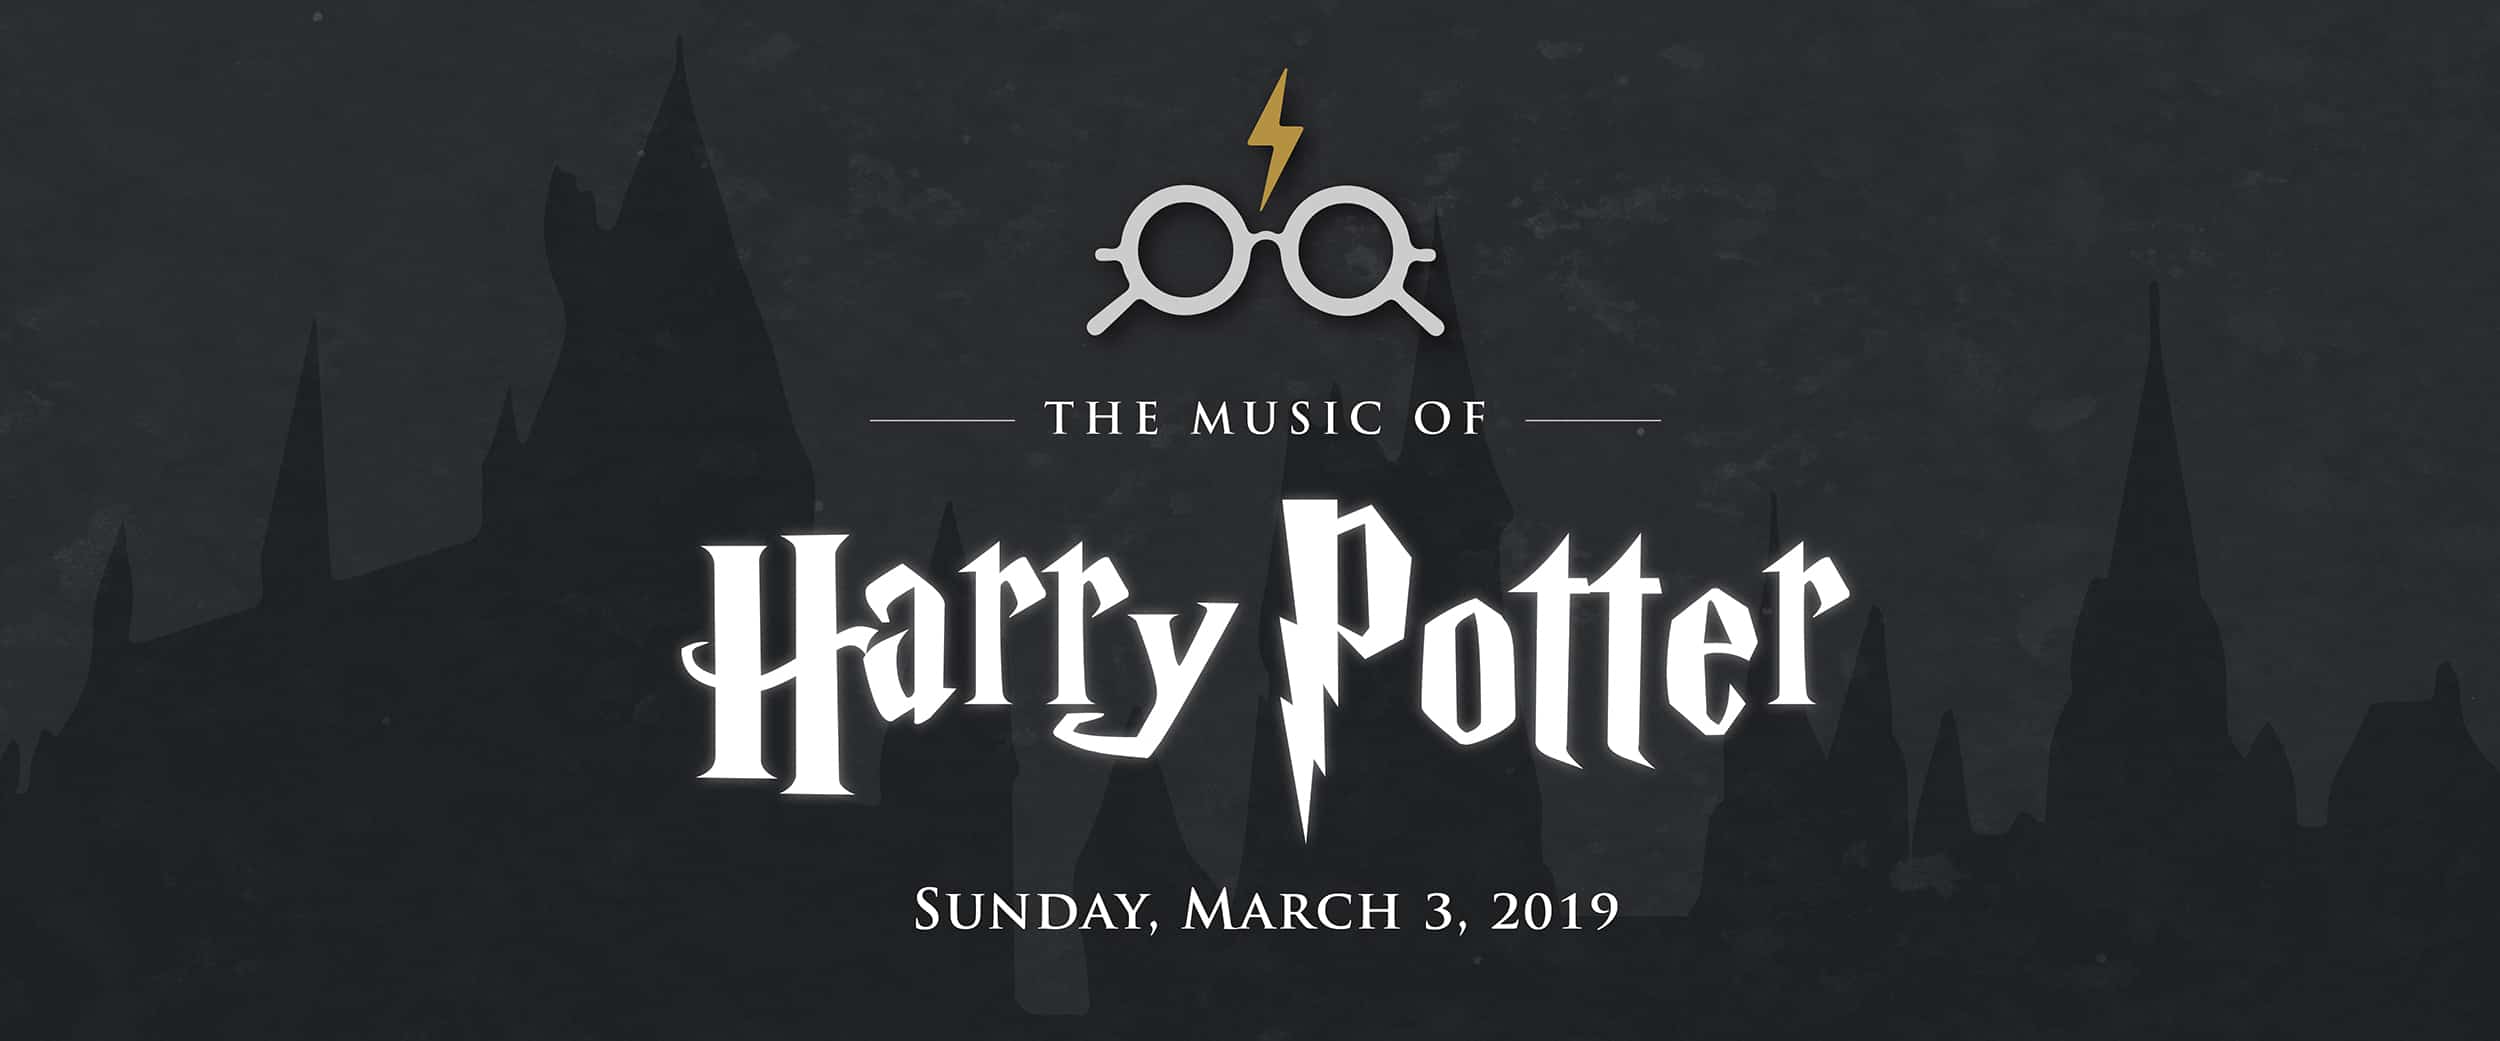 Harry Potter 2 Logo - The Music of Harry Potter at The Michigan Theatre | Sunday, March 3